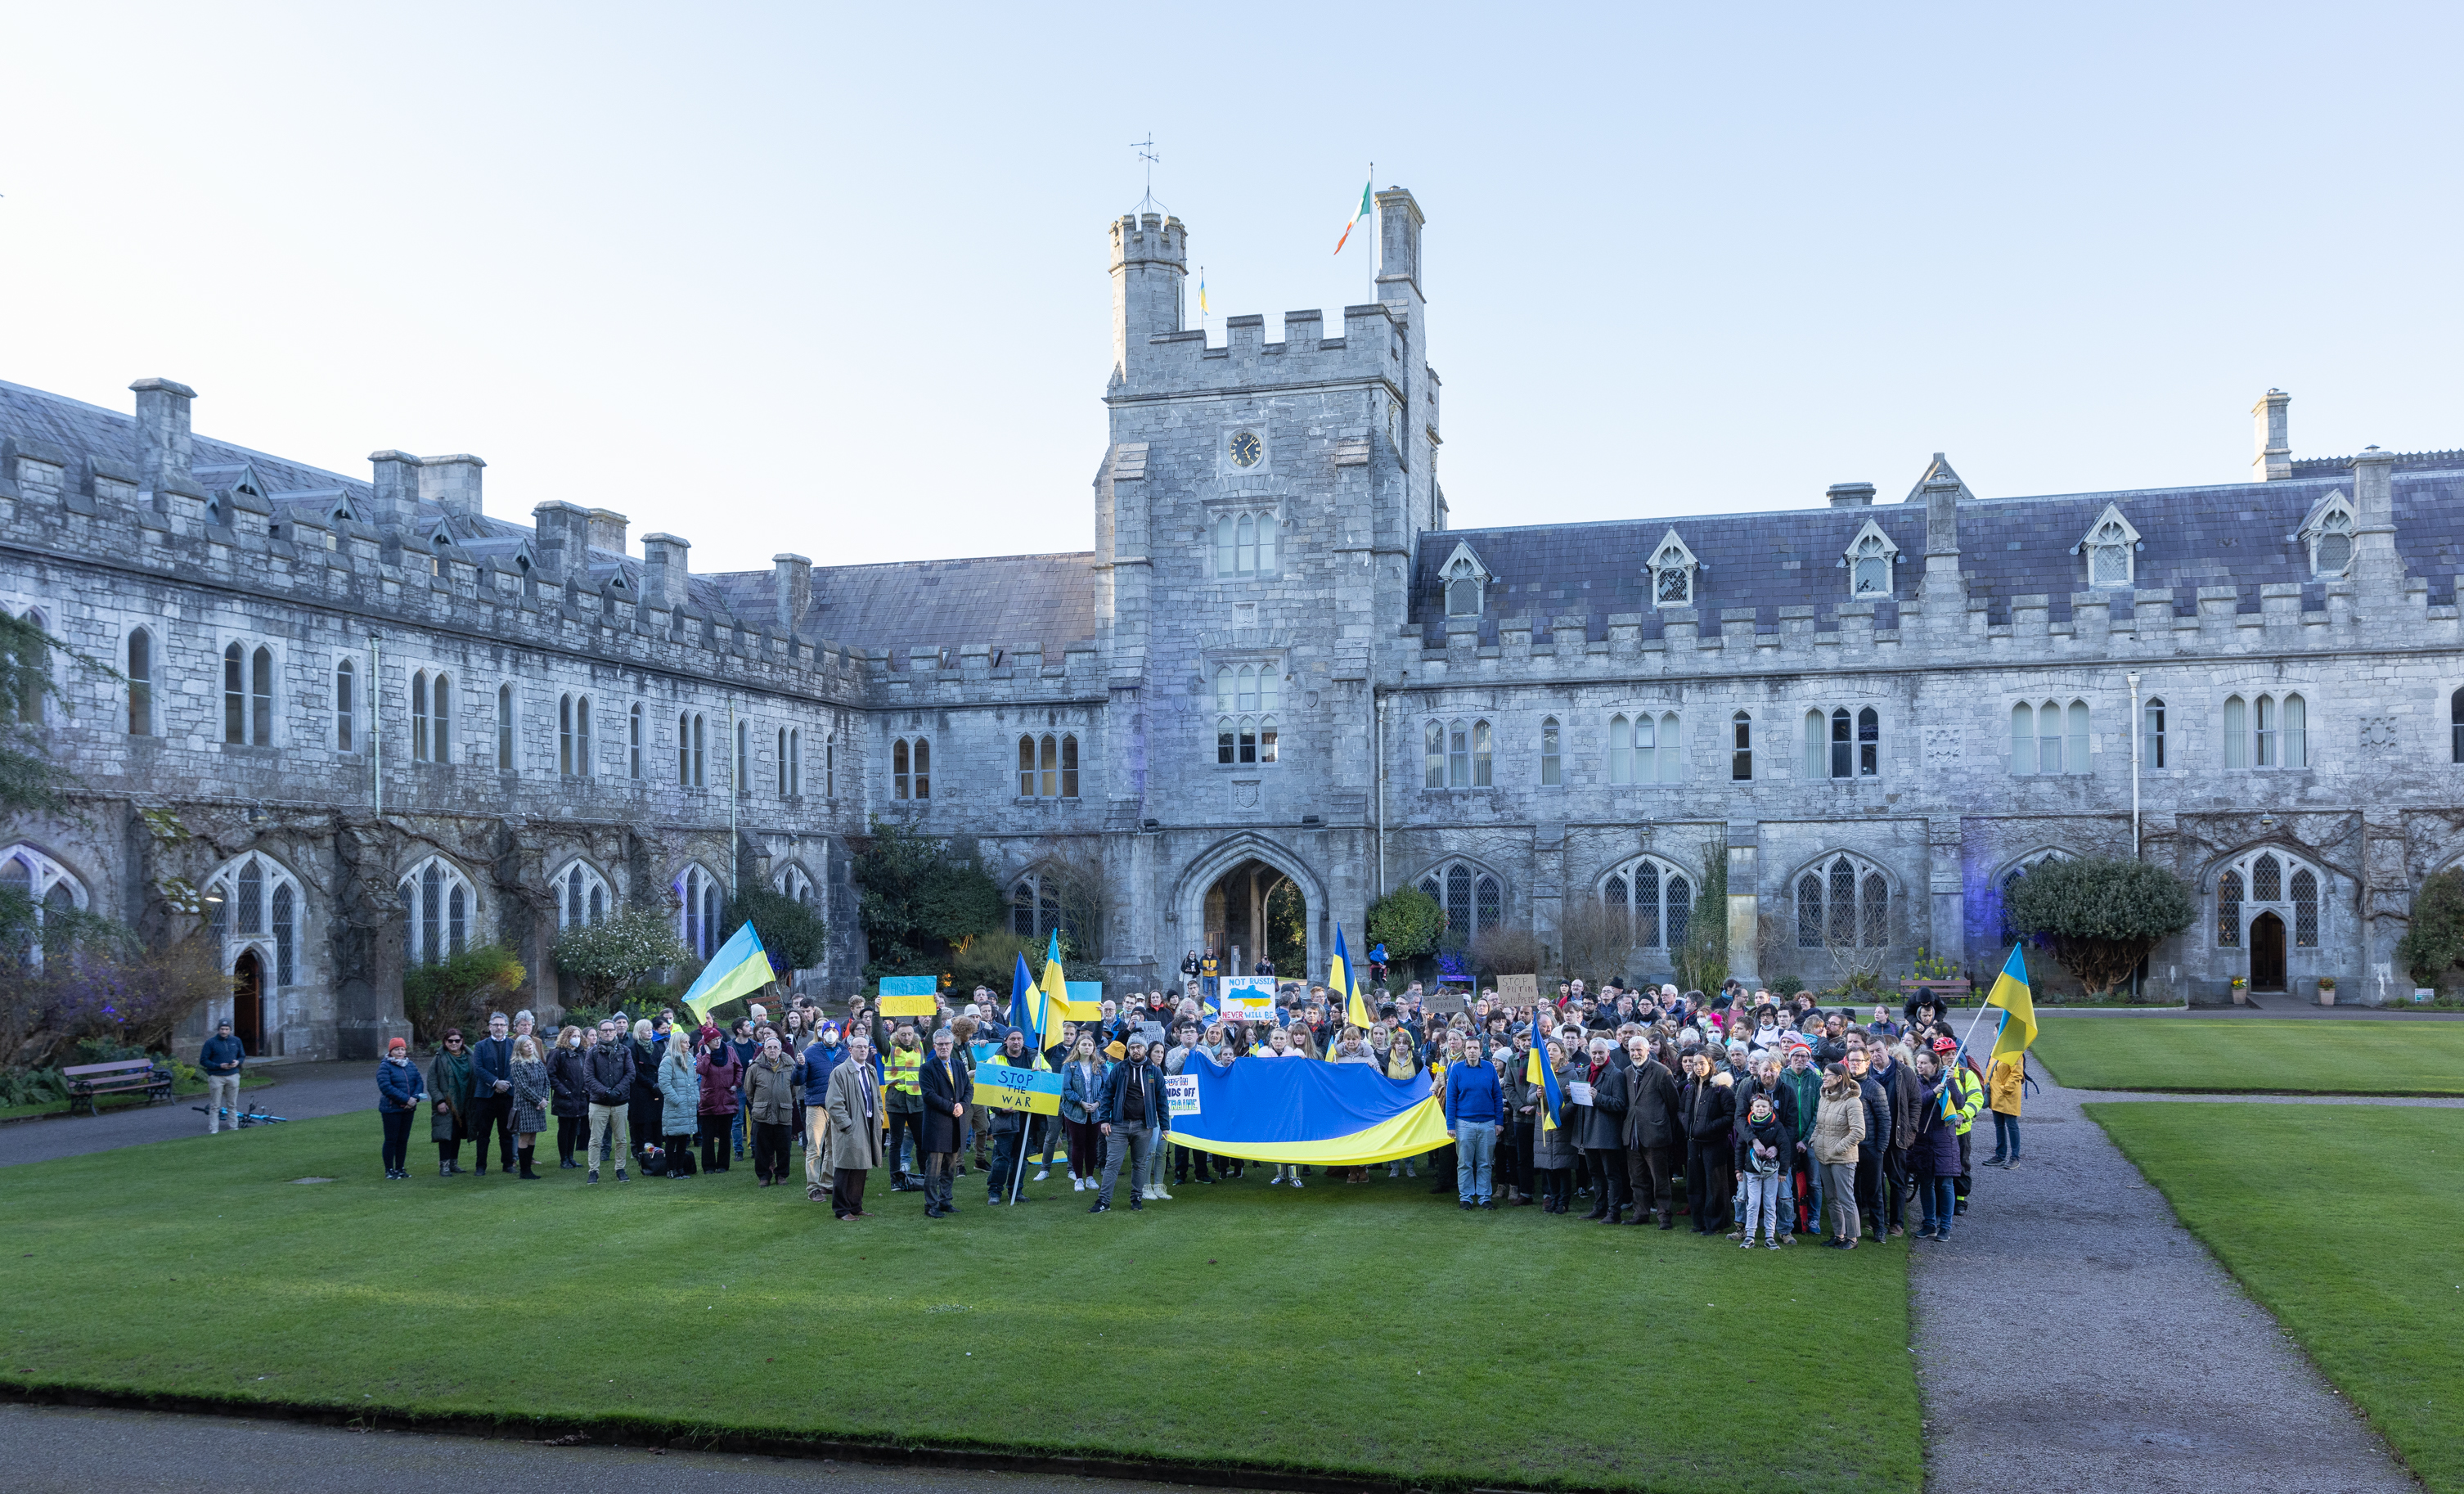 UCC University of Sanctuary expresses Solidarity with the People of Ukraine